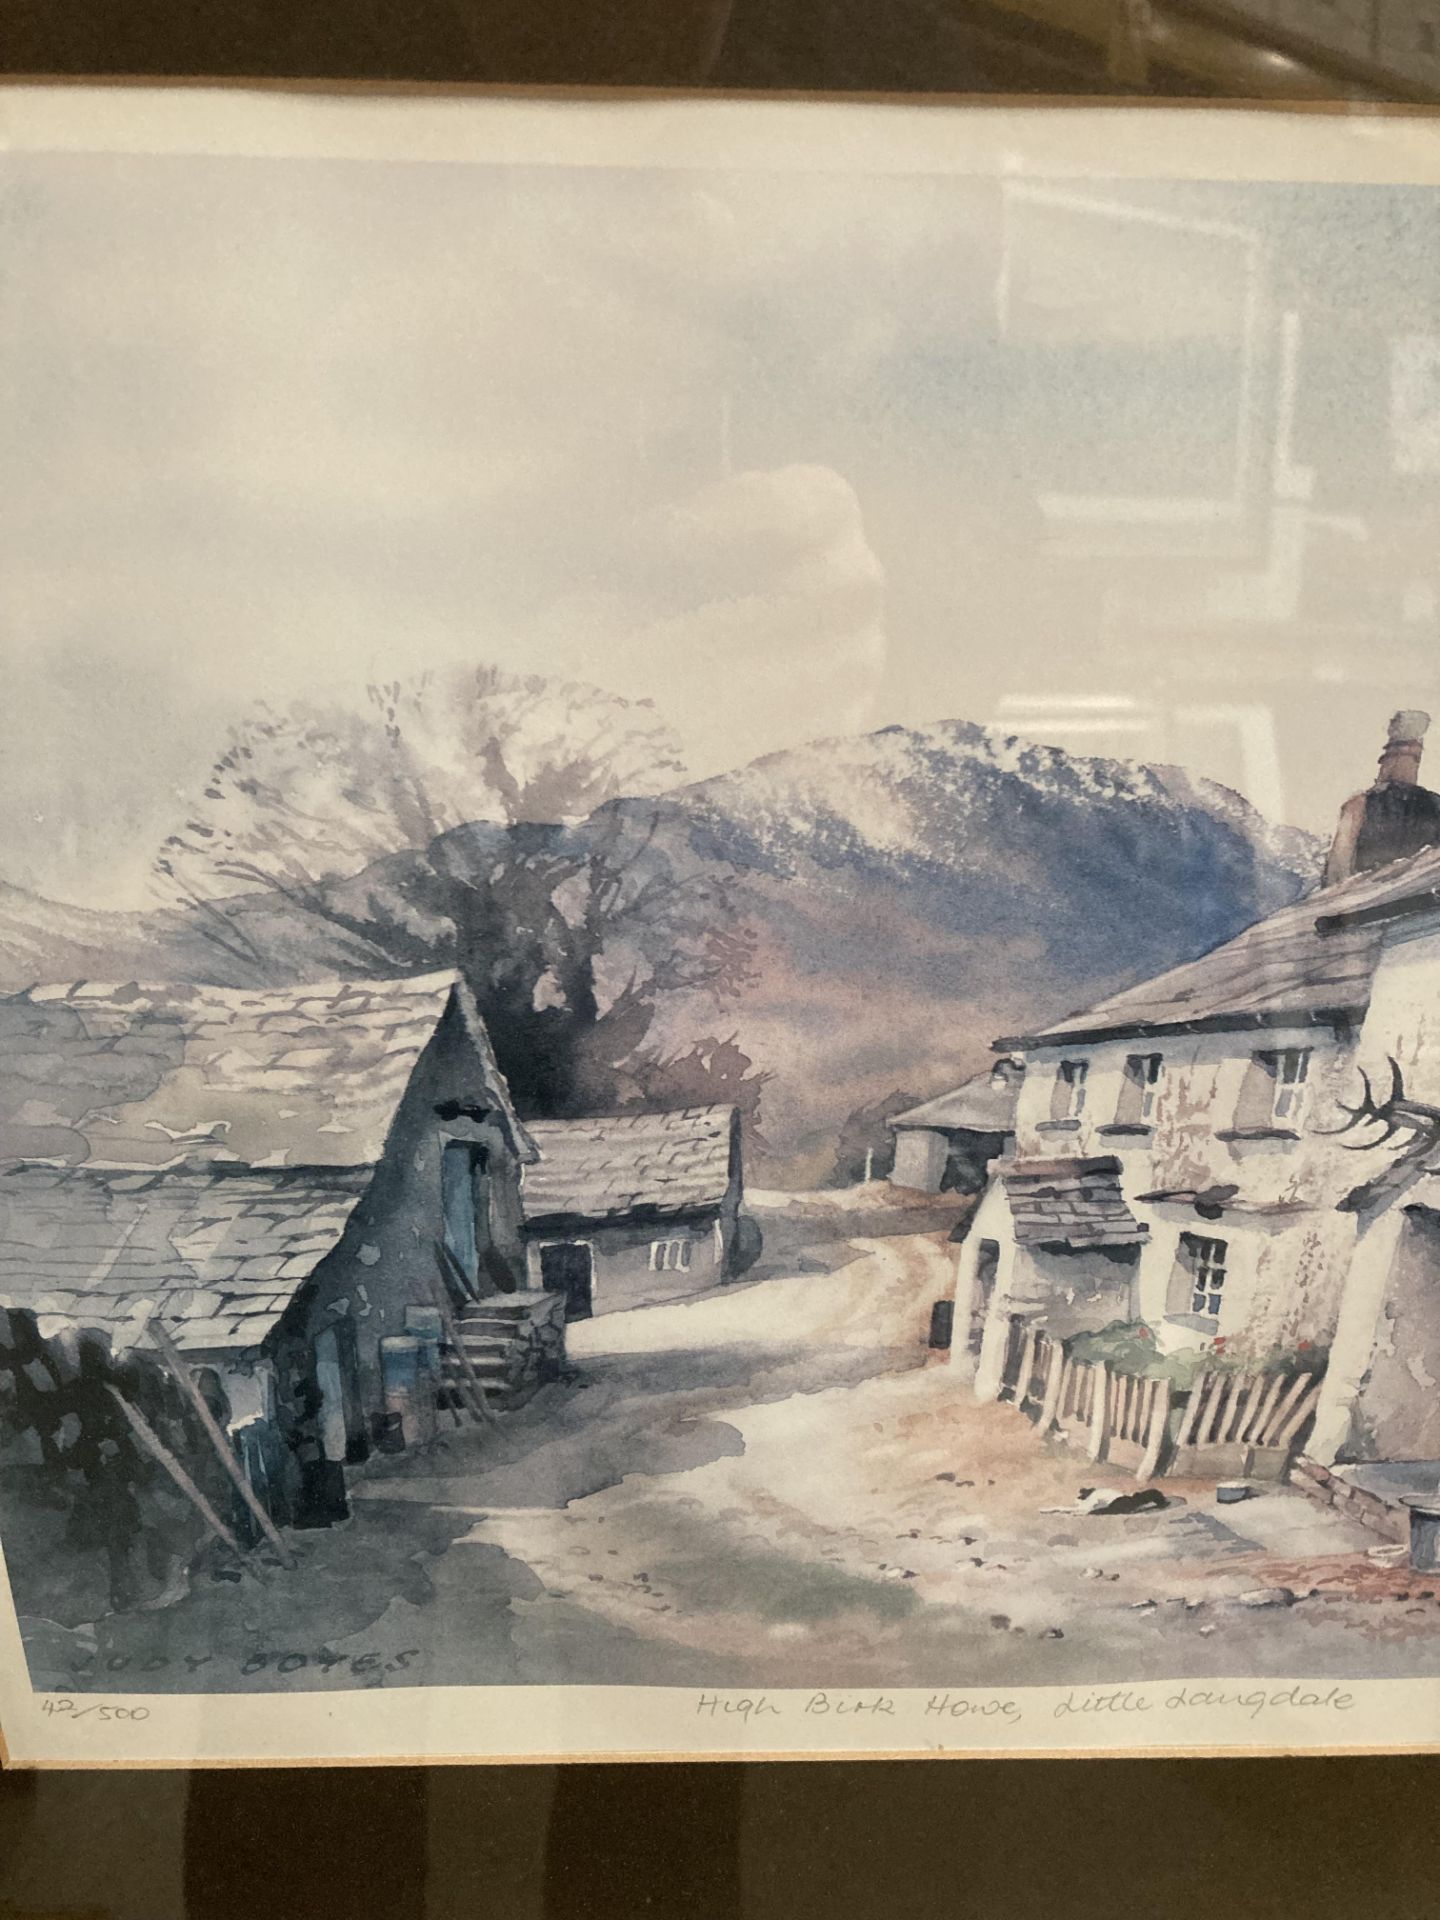 Judy Boyes, a set of four signed limited edition prints, Seathwaite Farm Barrowdale, no. - Image 4 of 6